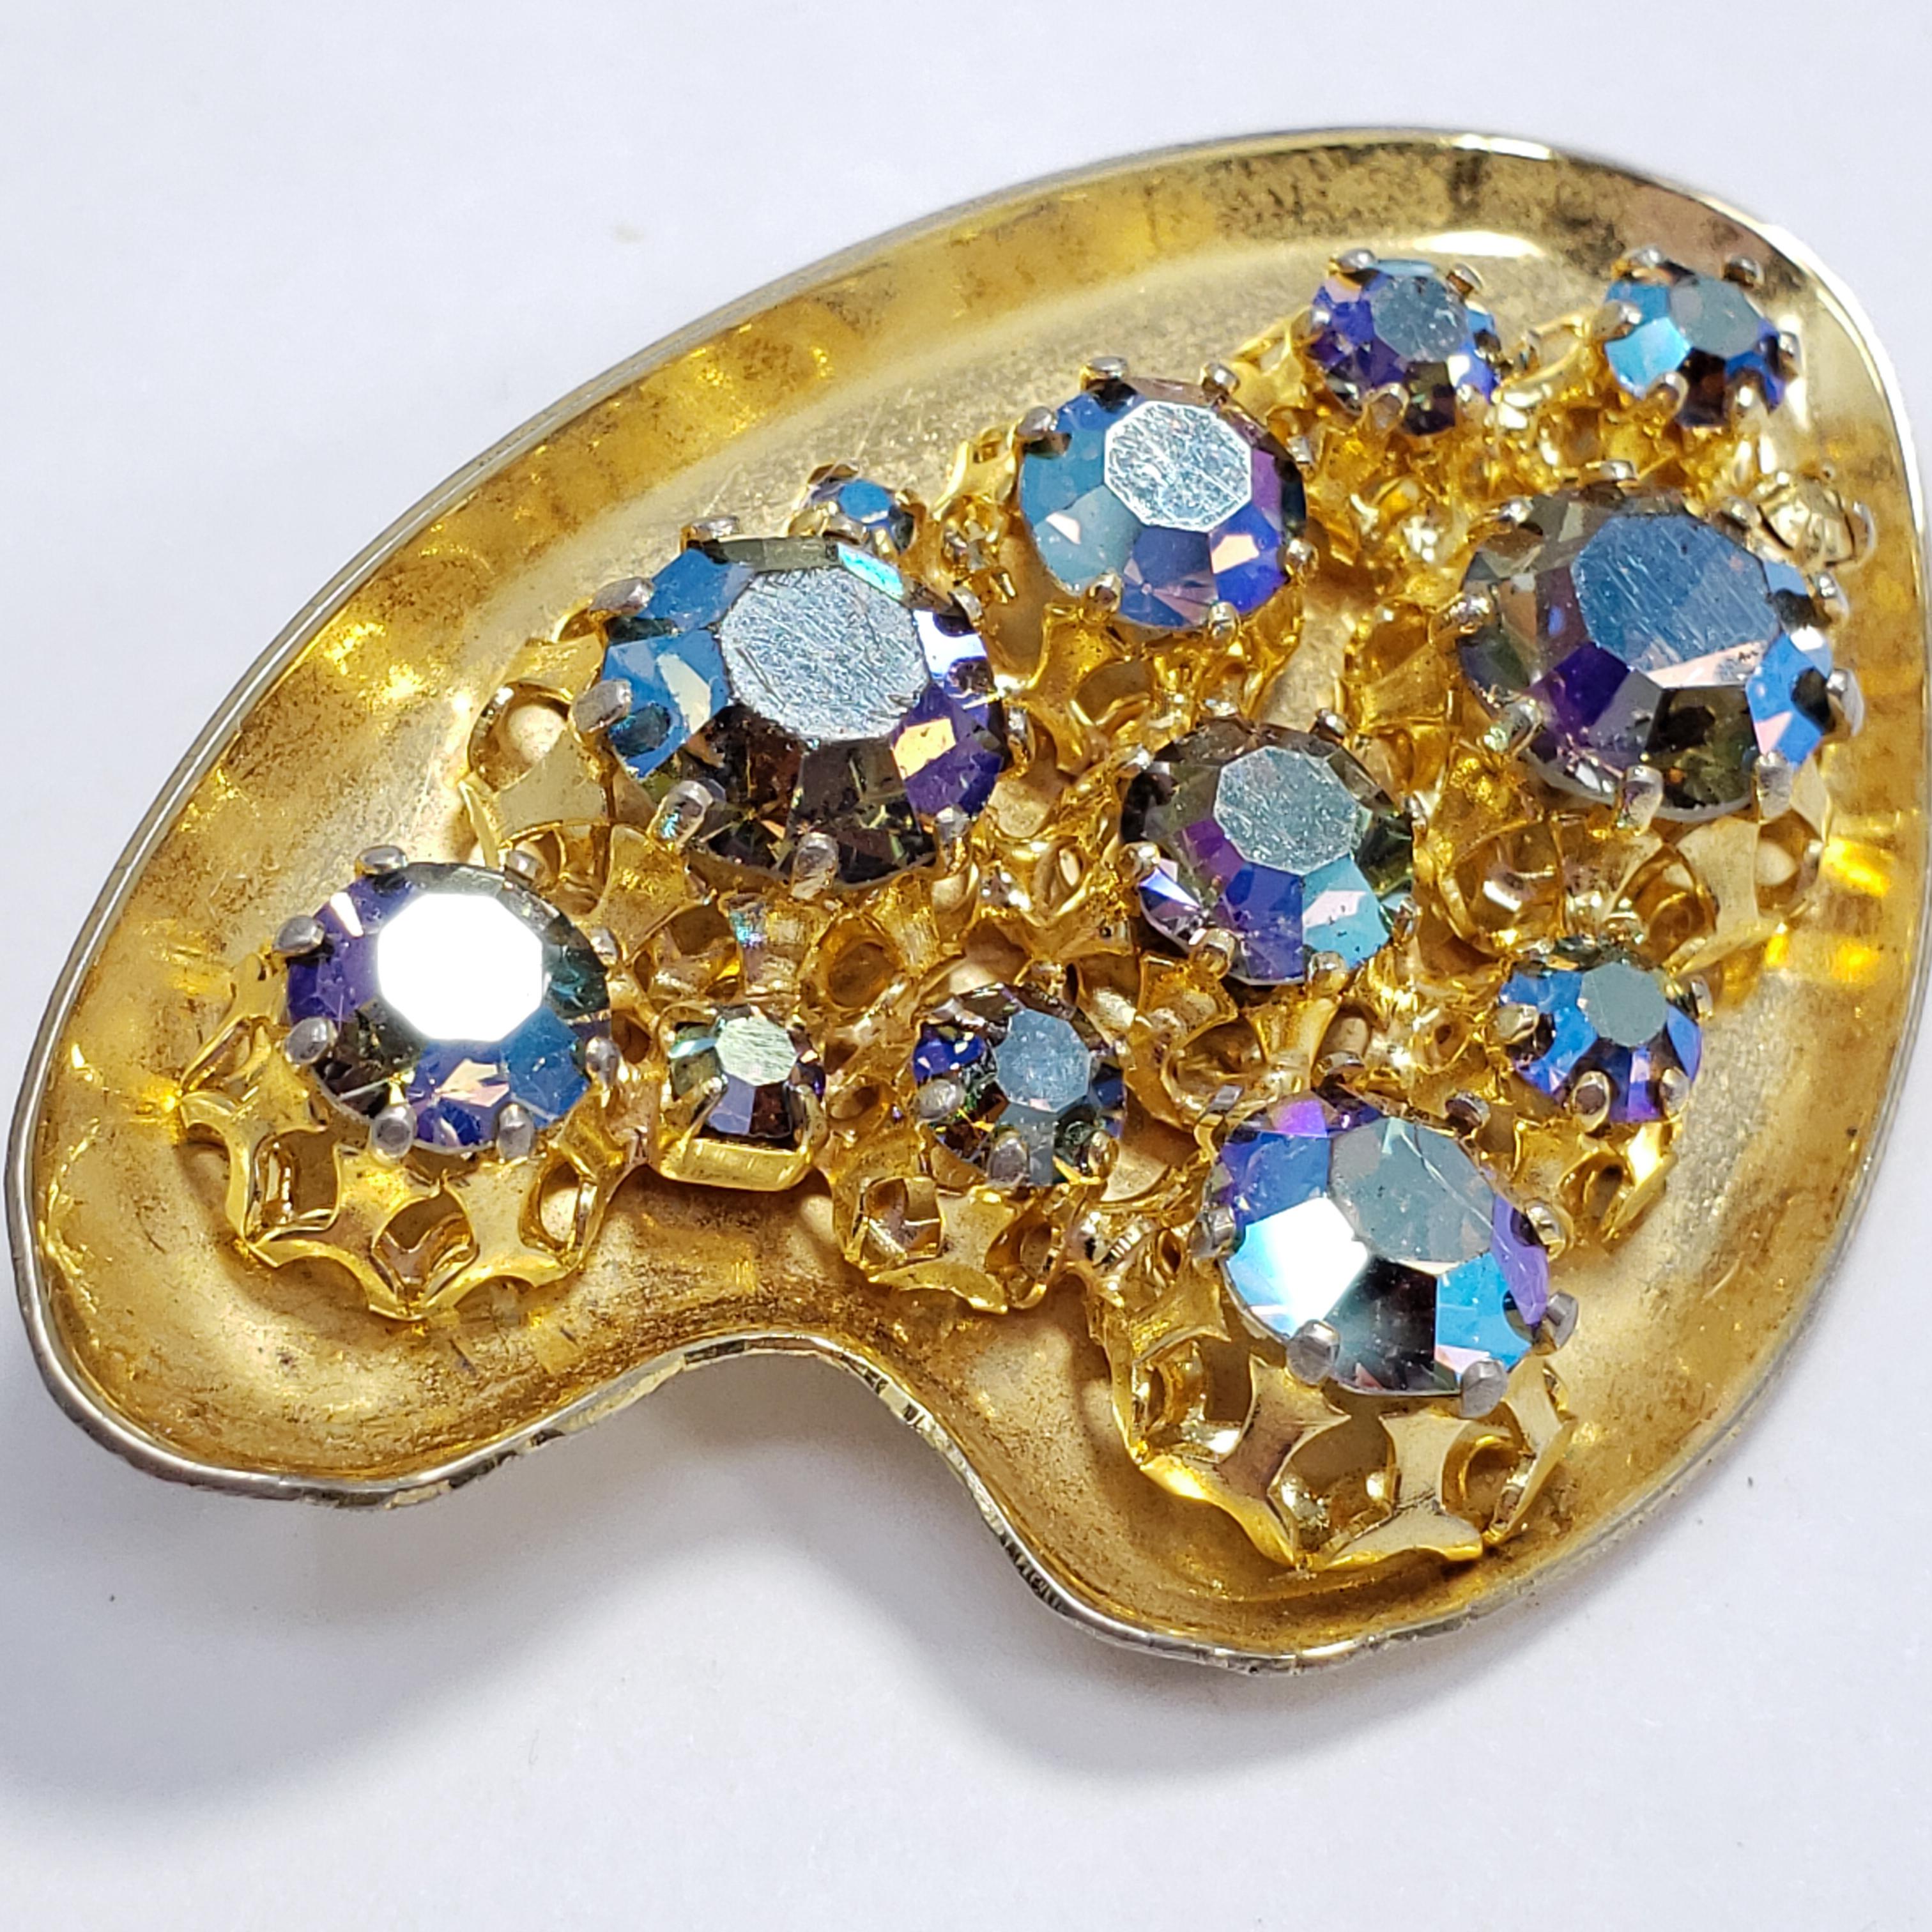 A whimsical pin brooch featuring aurora borealis crystals prong set in a gold-tone, easel-motif setting. Stylish!